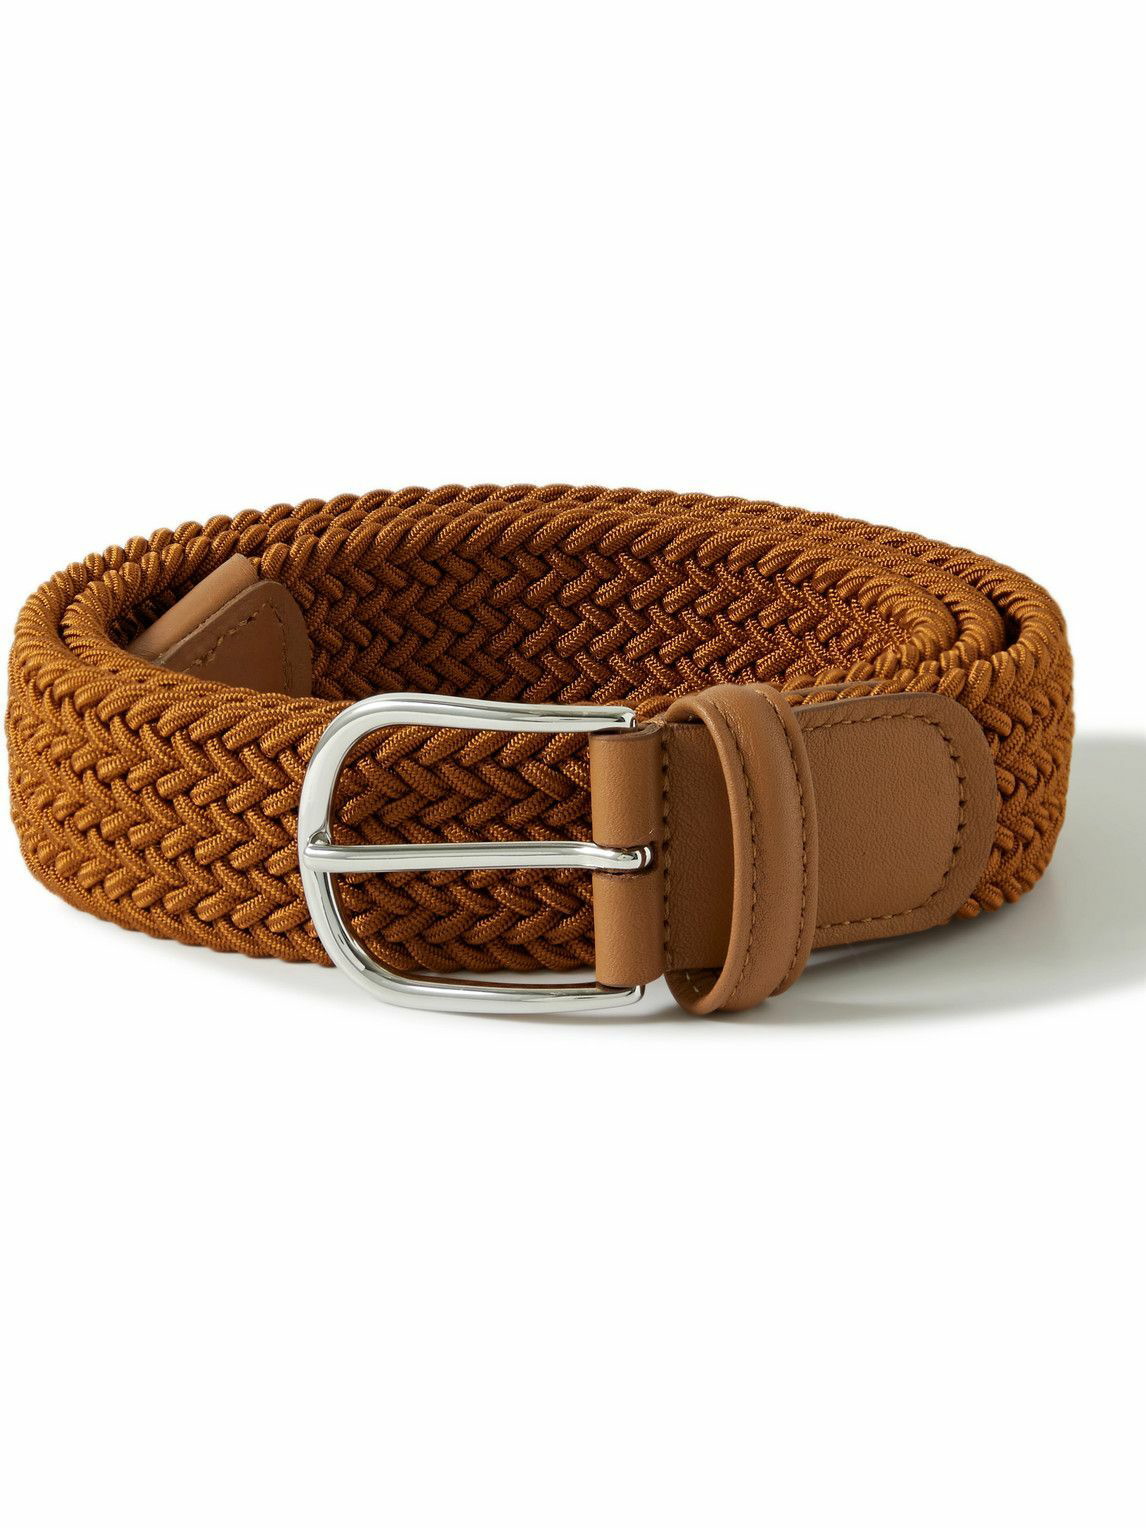 Anderson's - 3.5cm Leather-Trimmed Woven Elastic Belt - Brown Anderson's